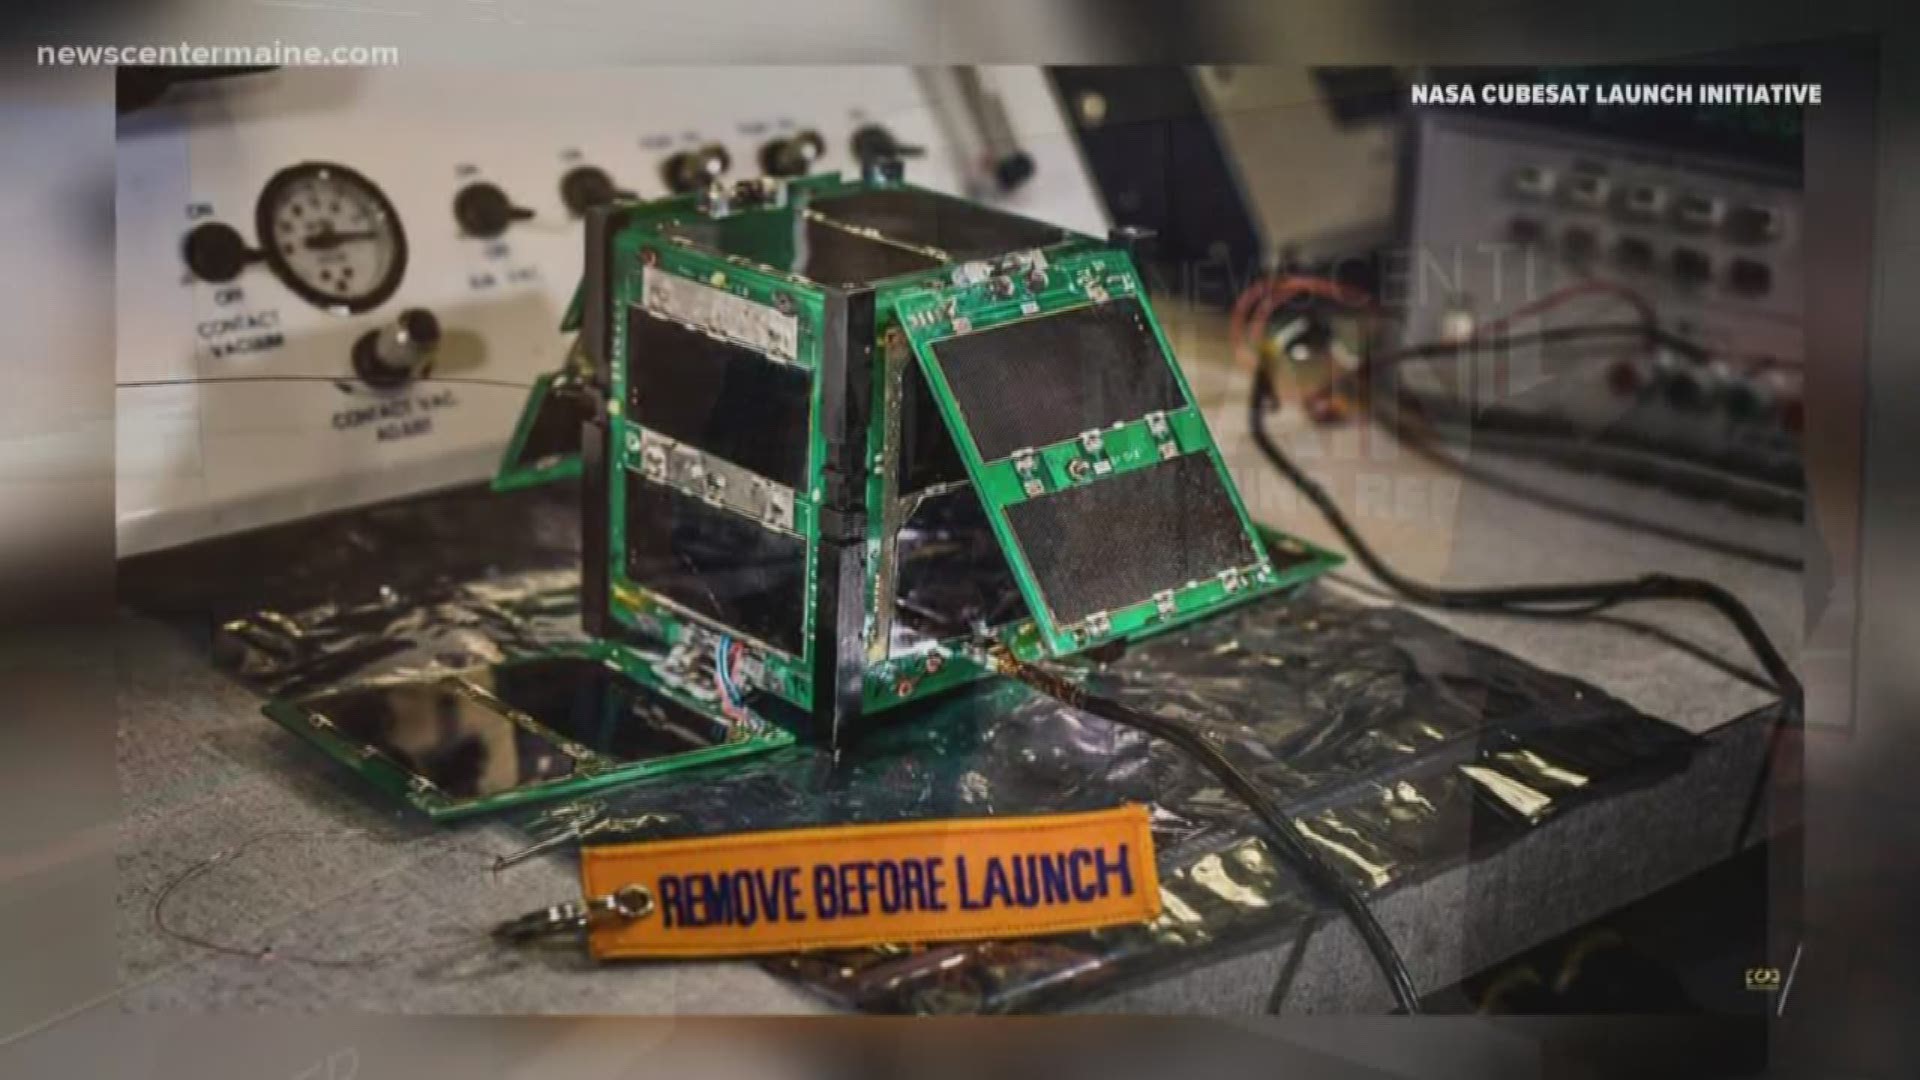 Some Maine public schools and college students will contribute to NASA's space research programs with a small satellite.